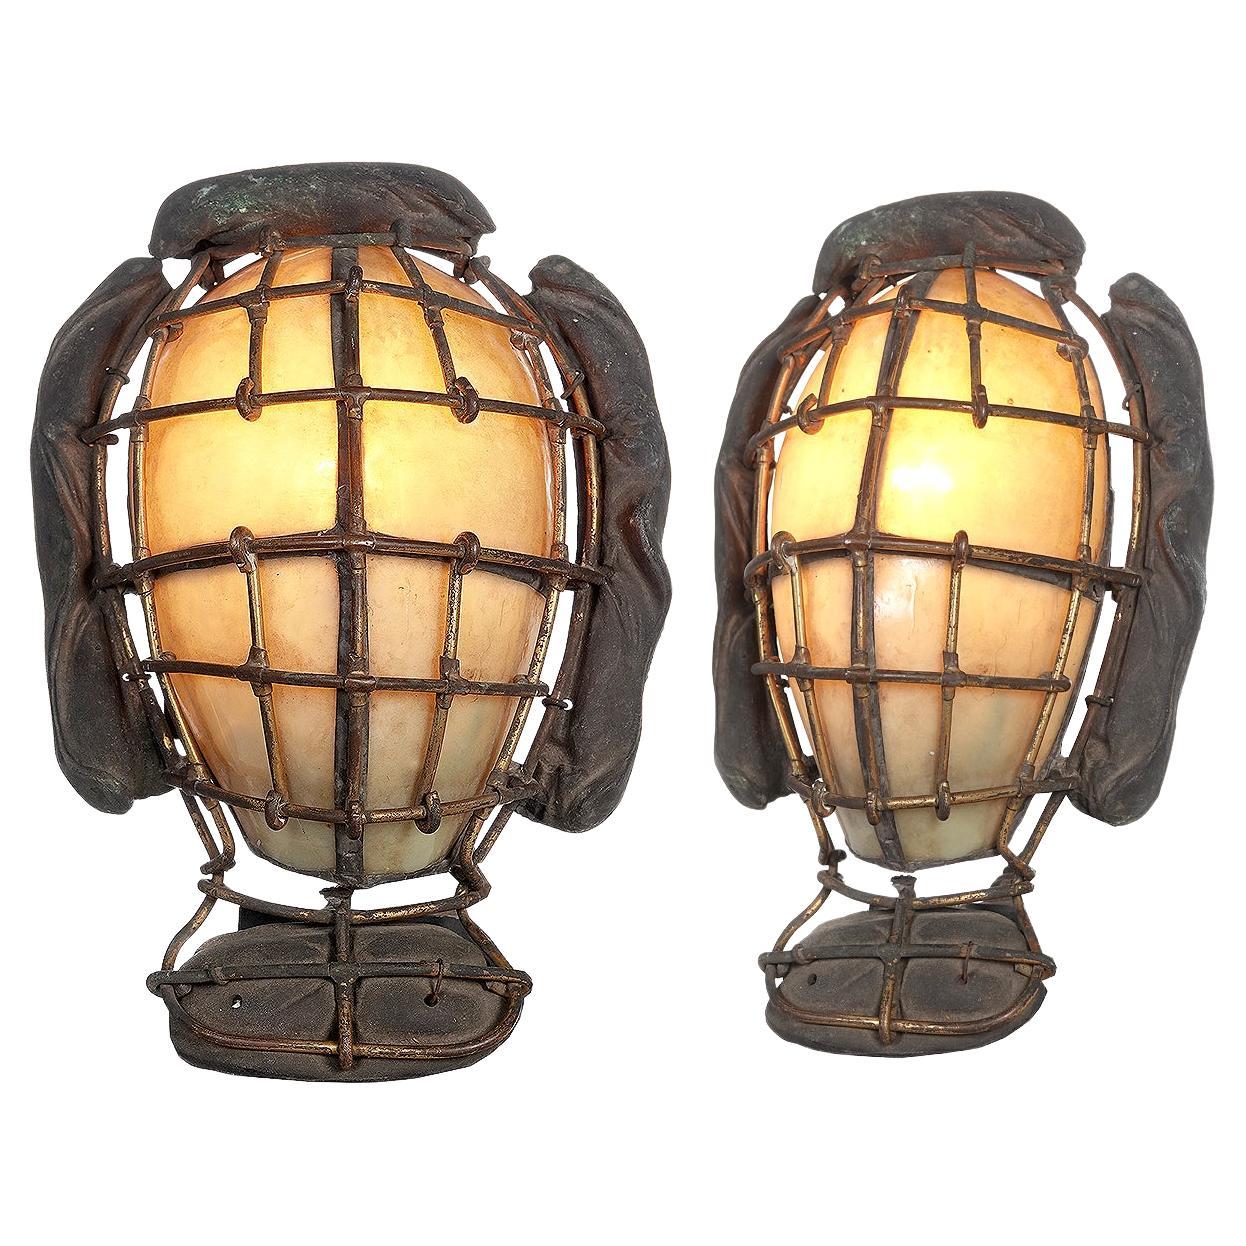 Matching Pair of Very Unique Baseball Catchers Mask Wall Sconces